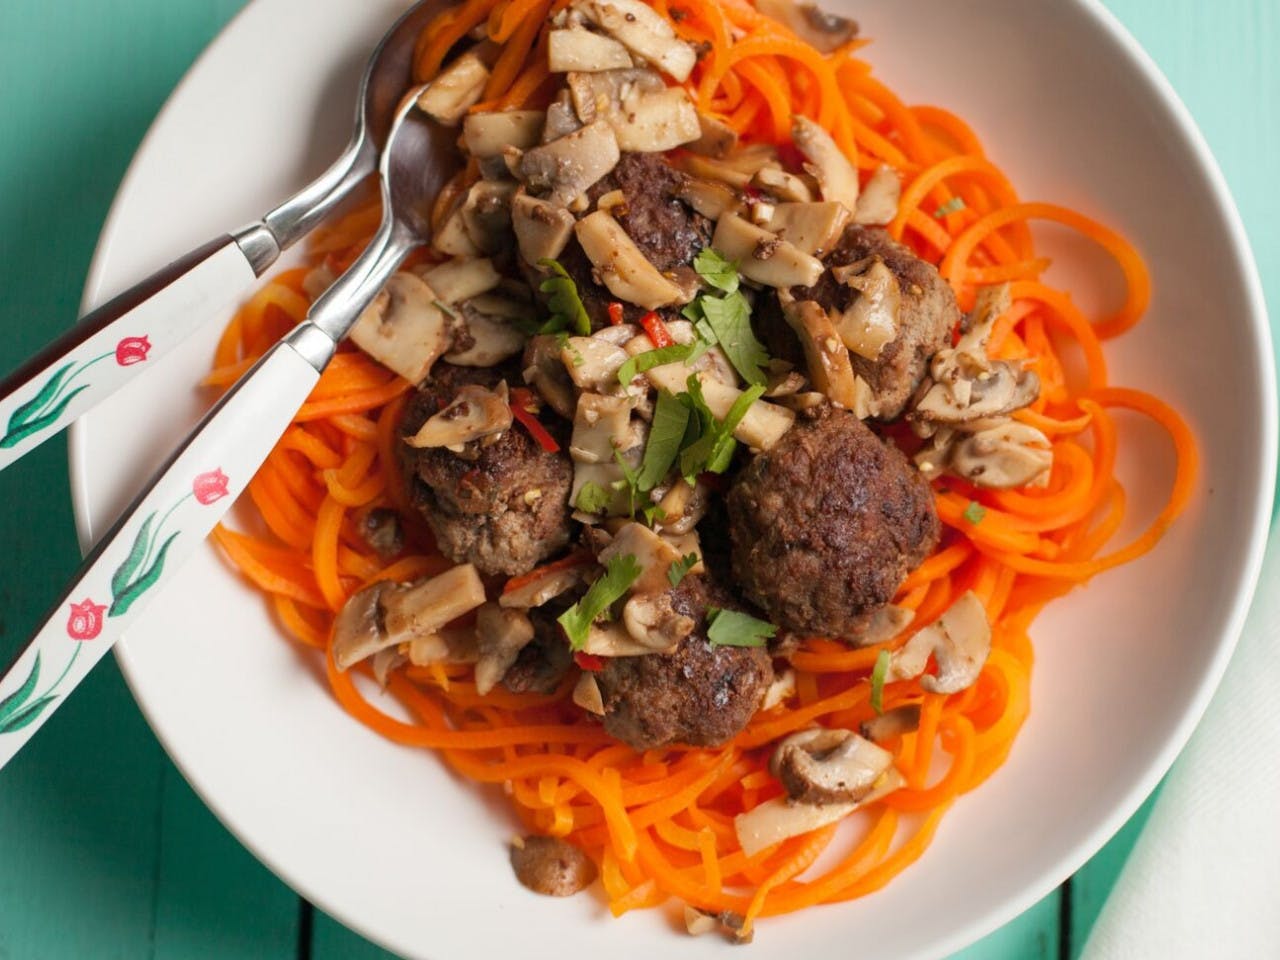 Carrot Spaghetti with Meatballs and Brown Mushrooms